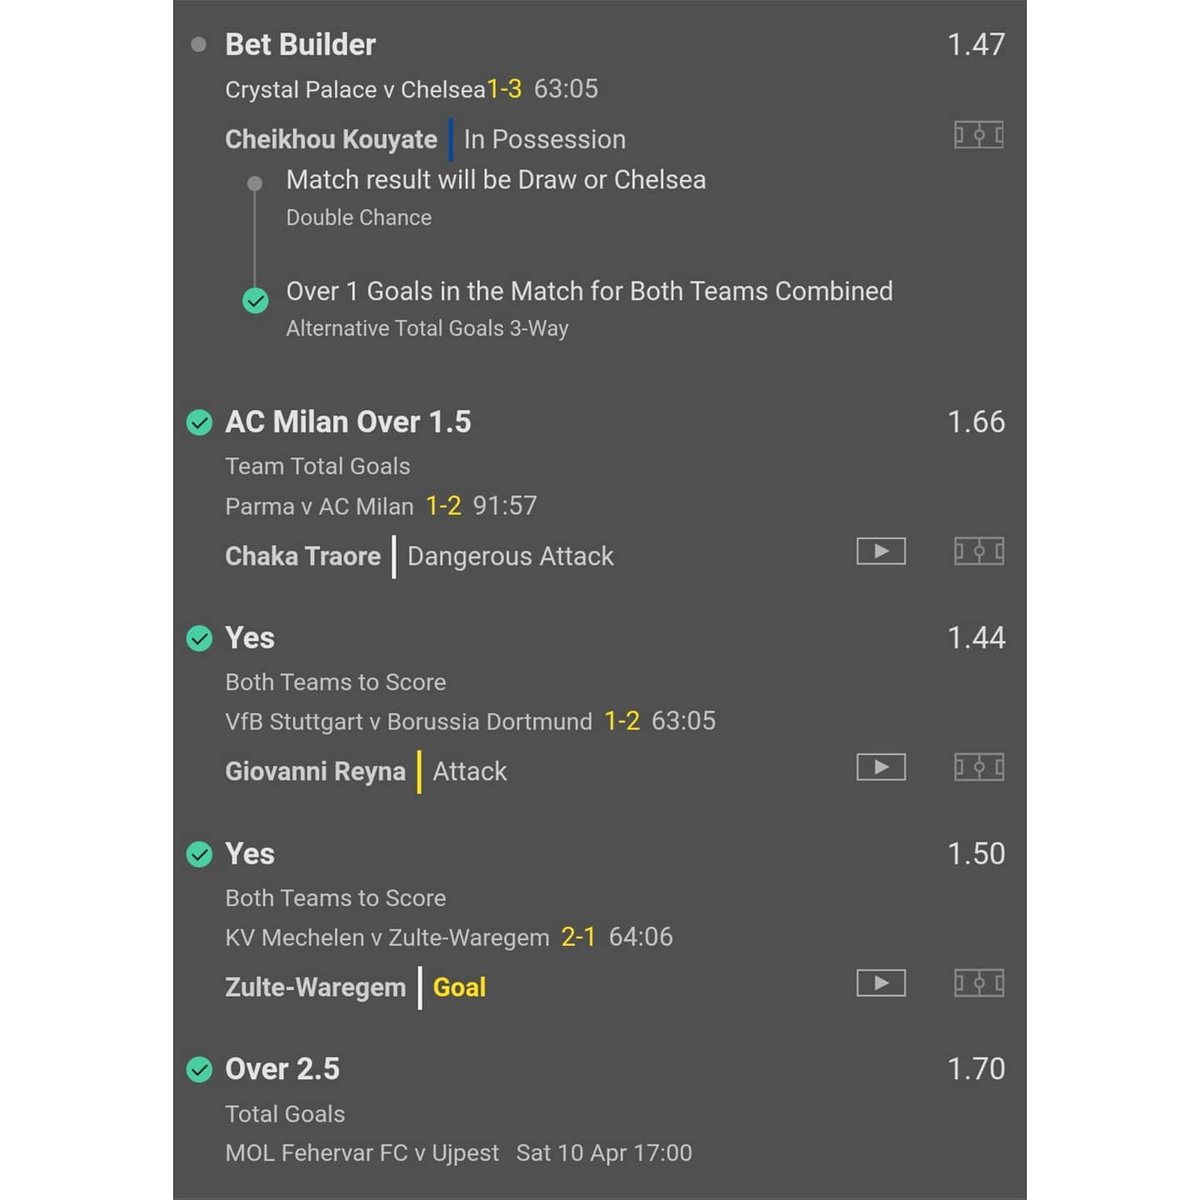 Live Betting Tips We Had Another Biiiiig Win At Our Vip Group This Time 9 Odd Congratulations To Our Loyal Members That Support Us If U Wanna Join Our